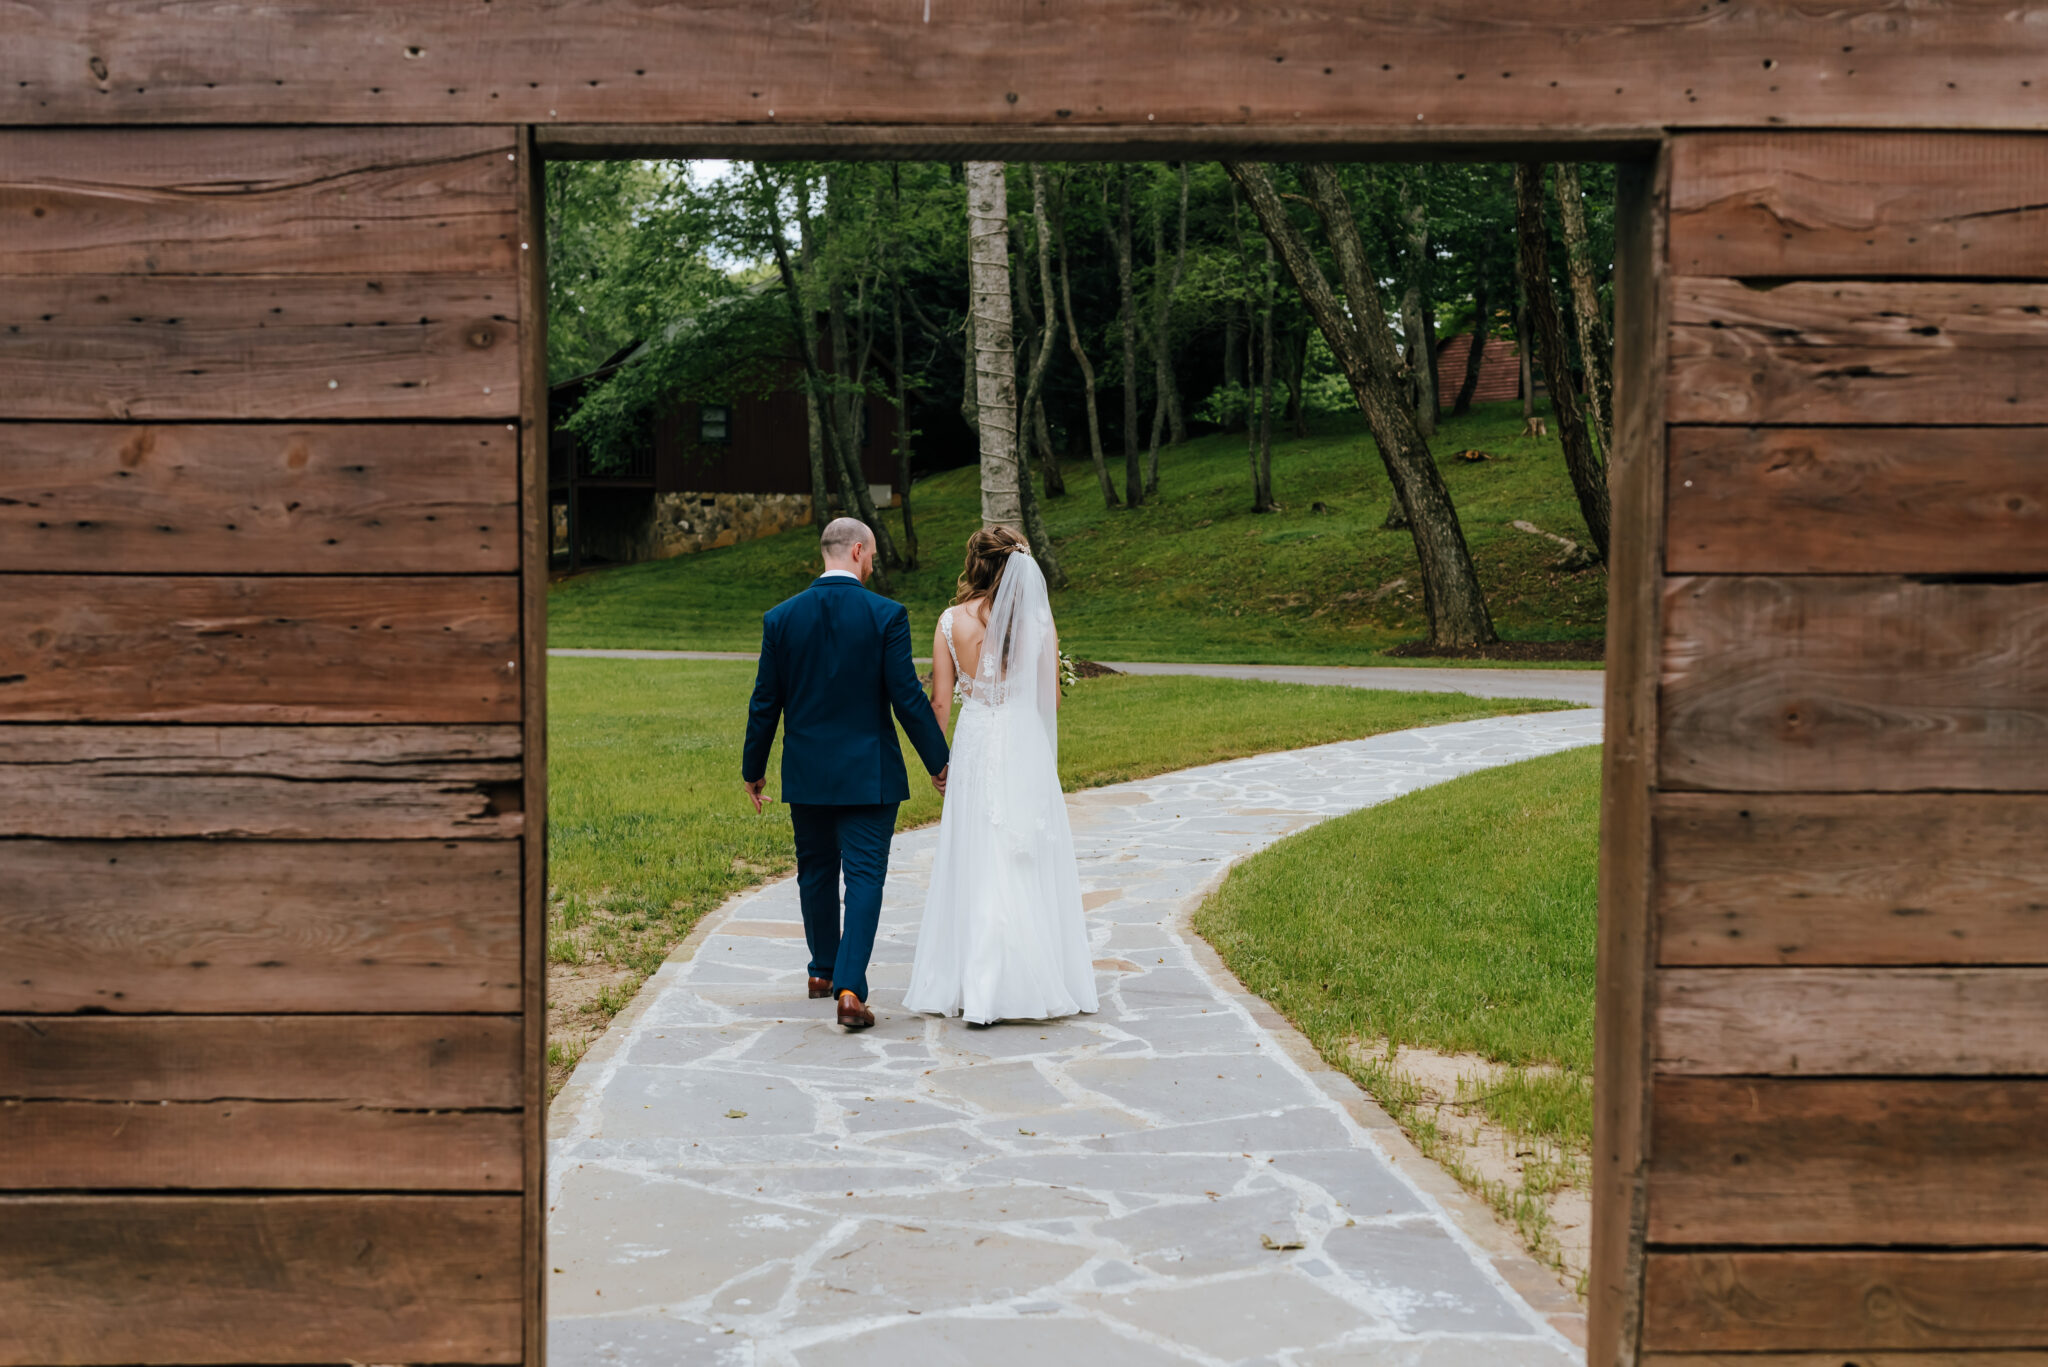 Photo from behind as bride and groom walk off into the distance